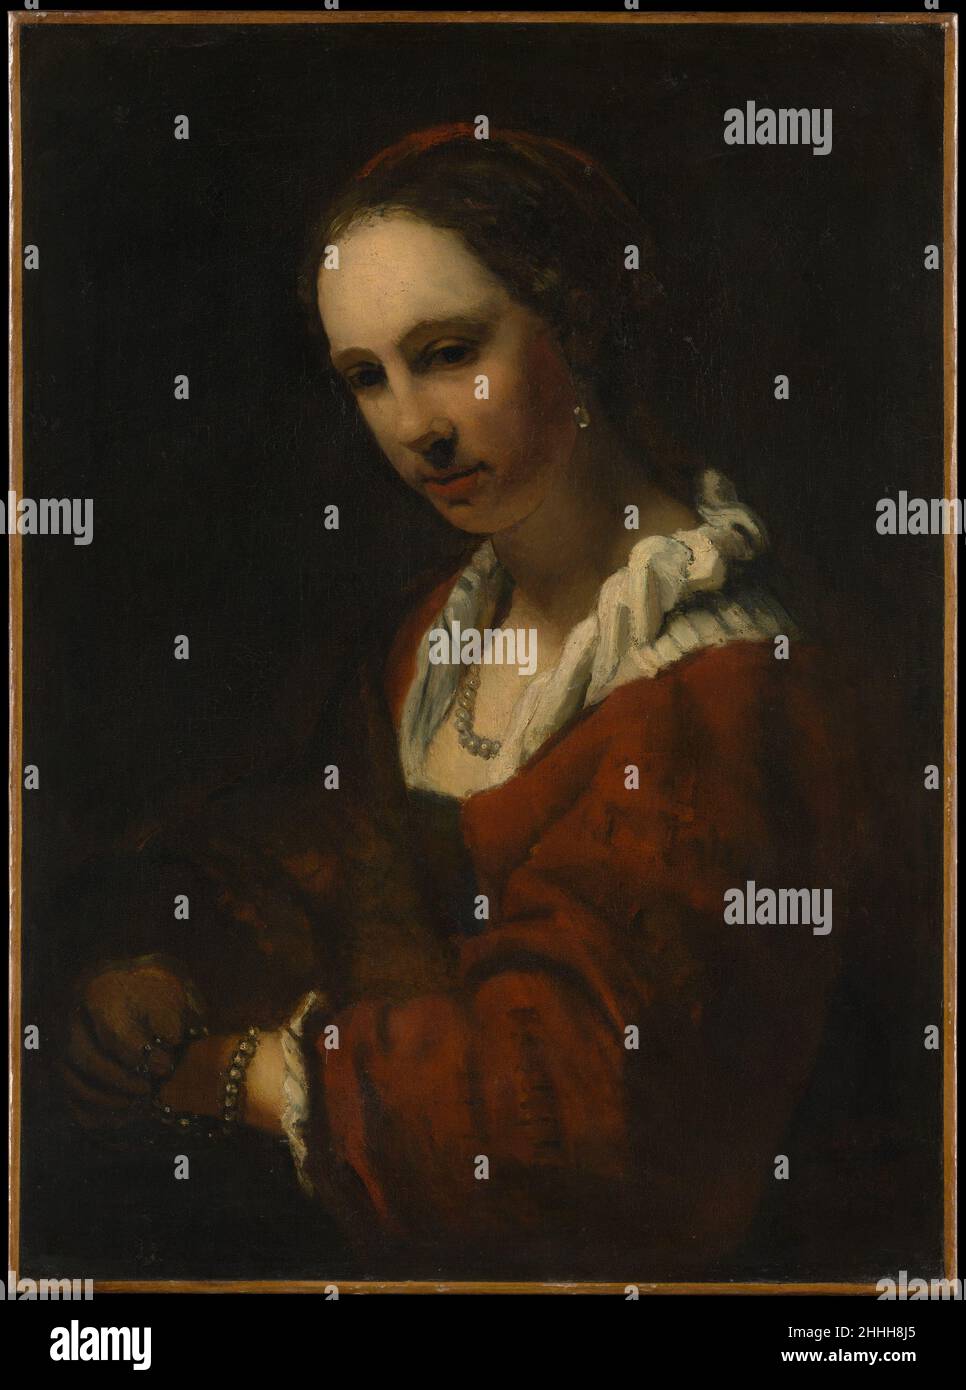 Young Woman with a Pearl Necklace Copy after Willem Drost Dutch The sitter bears a resemblance to Hendrickje Stoffels (born about 1625–26, died 1663), Rembrandt's common-law wife and the subject of a number of his portraits, one of which is in the Metropolitan. The picture is the work of a pupil of Rembrandt, and the strong light striking the face suggests that it may be by Barent Fabritius. Another version is in Dresden.. Young Woman with a Pearl Necklace. Copy after Willem Drost (Dutch, late 17th or early 18th century). Oil on canvas. Paintings Stock Photo